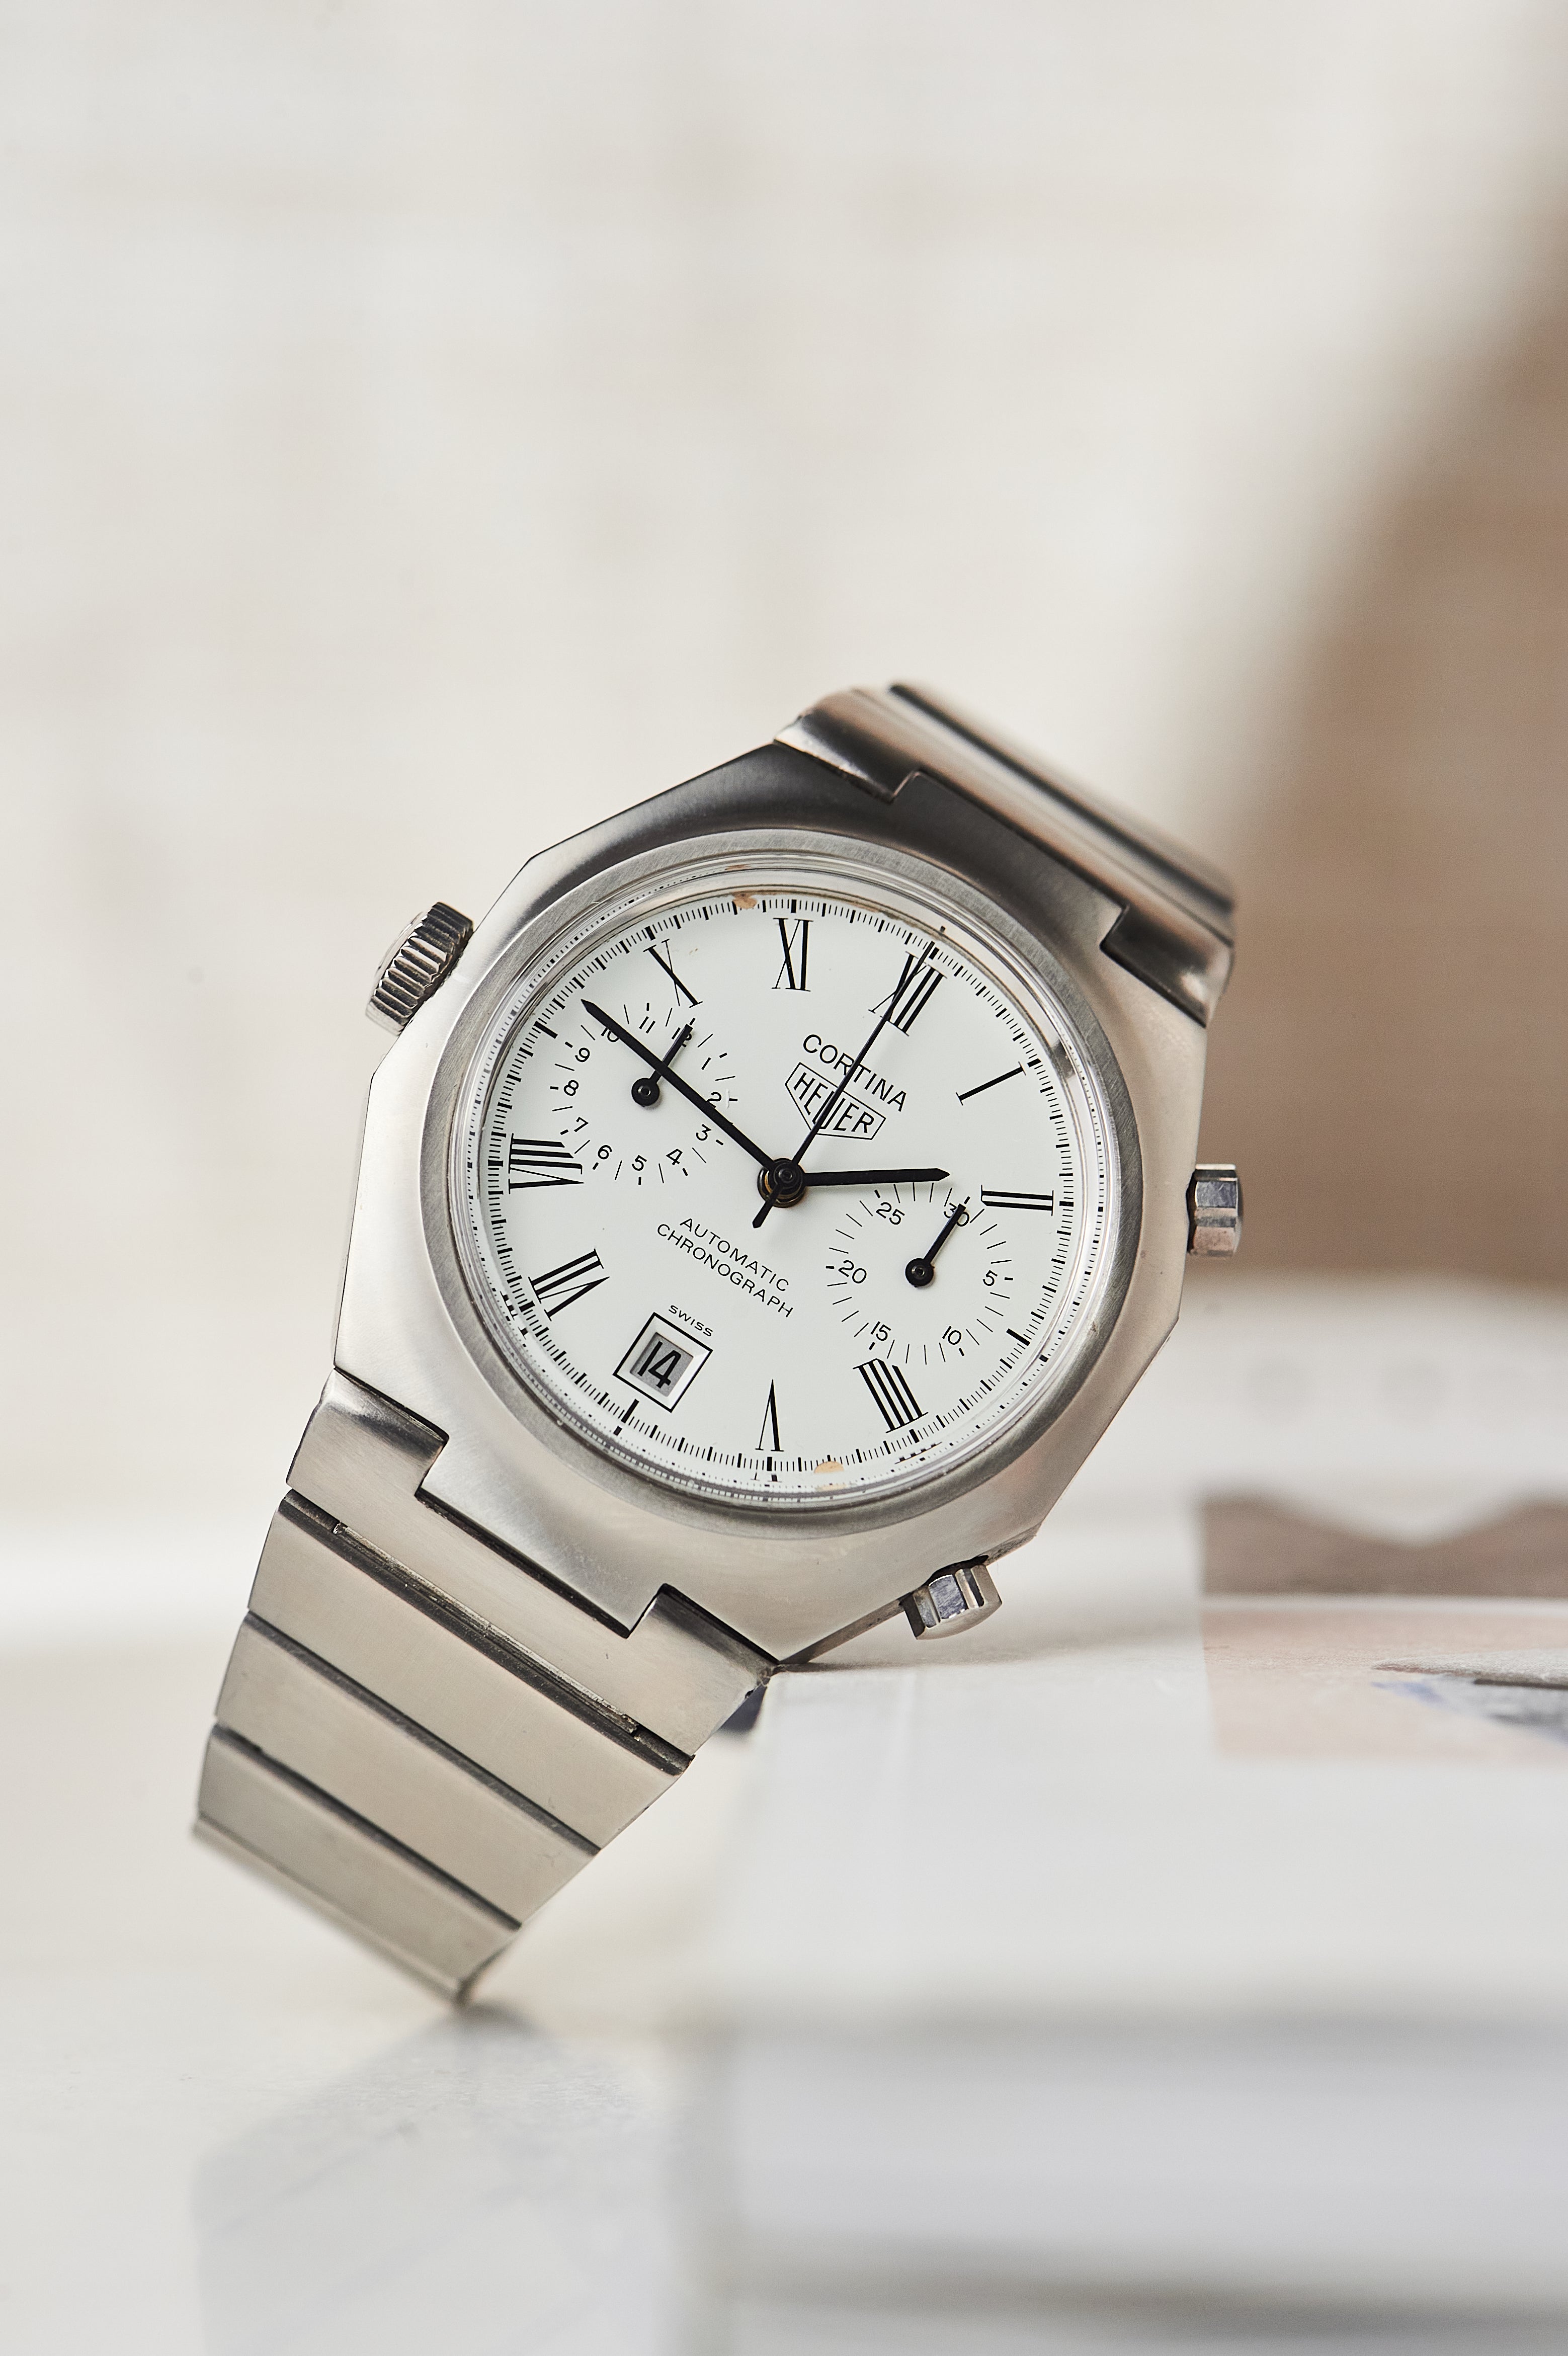 Carl F. Bucherer joins forces with Cortina Watch (...)